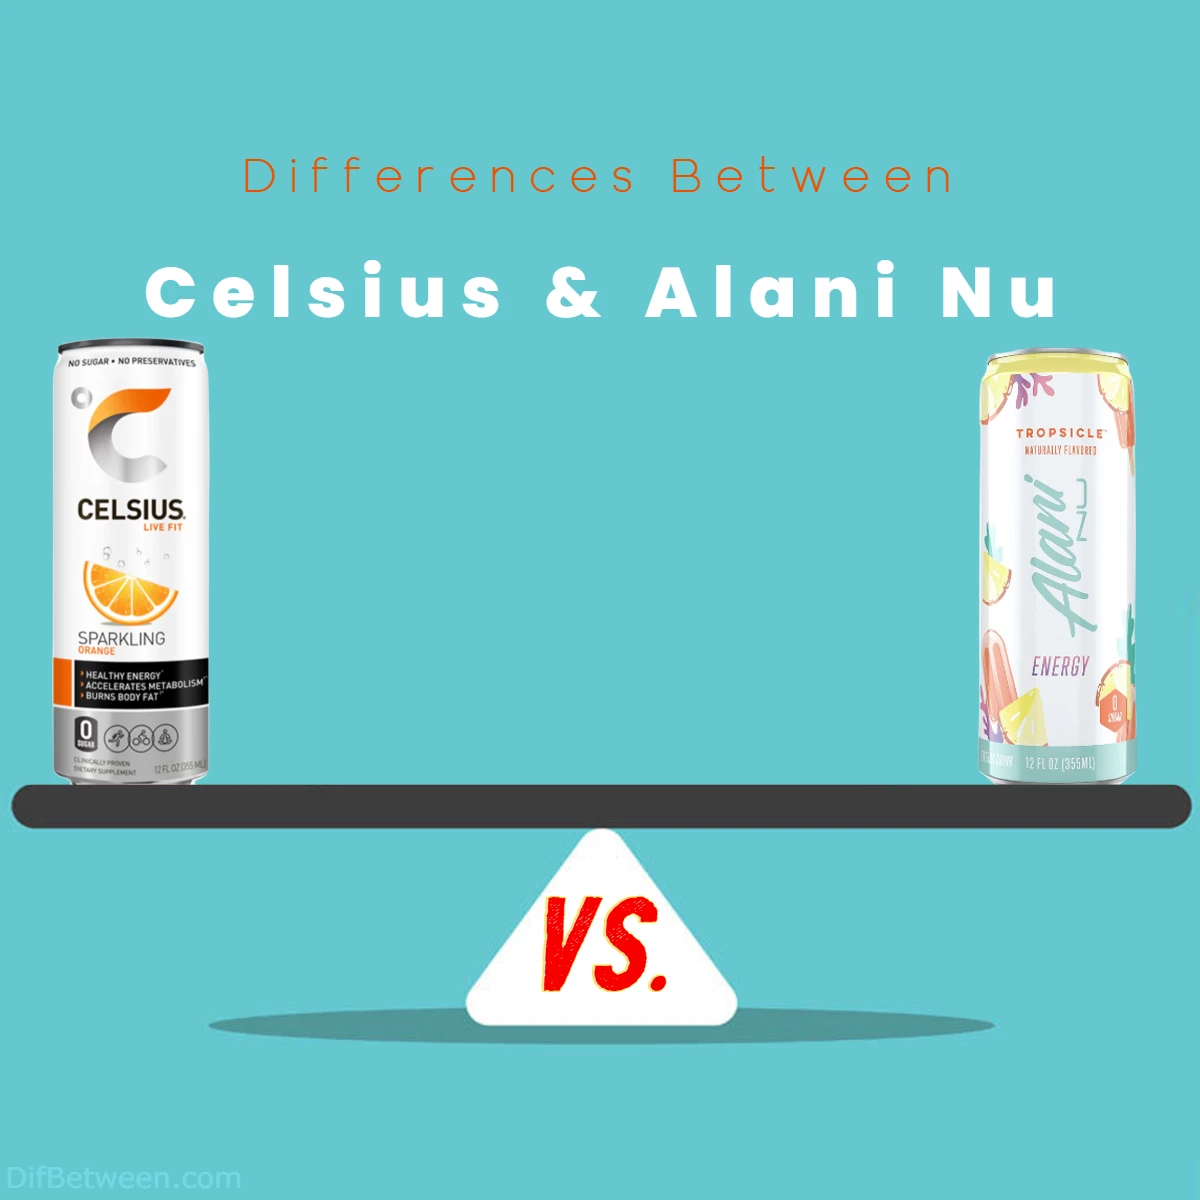 Differences Between Alani Nu and Celsius